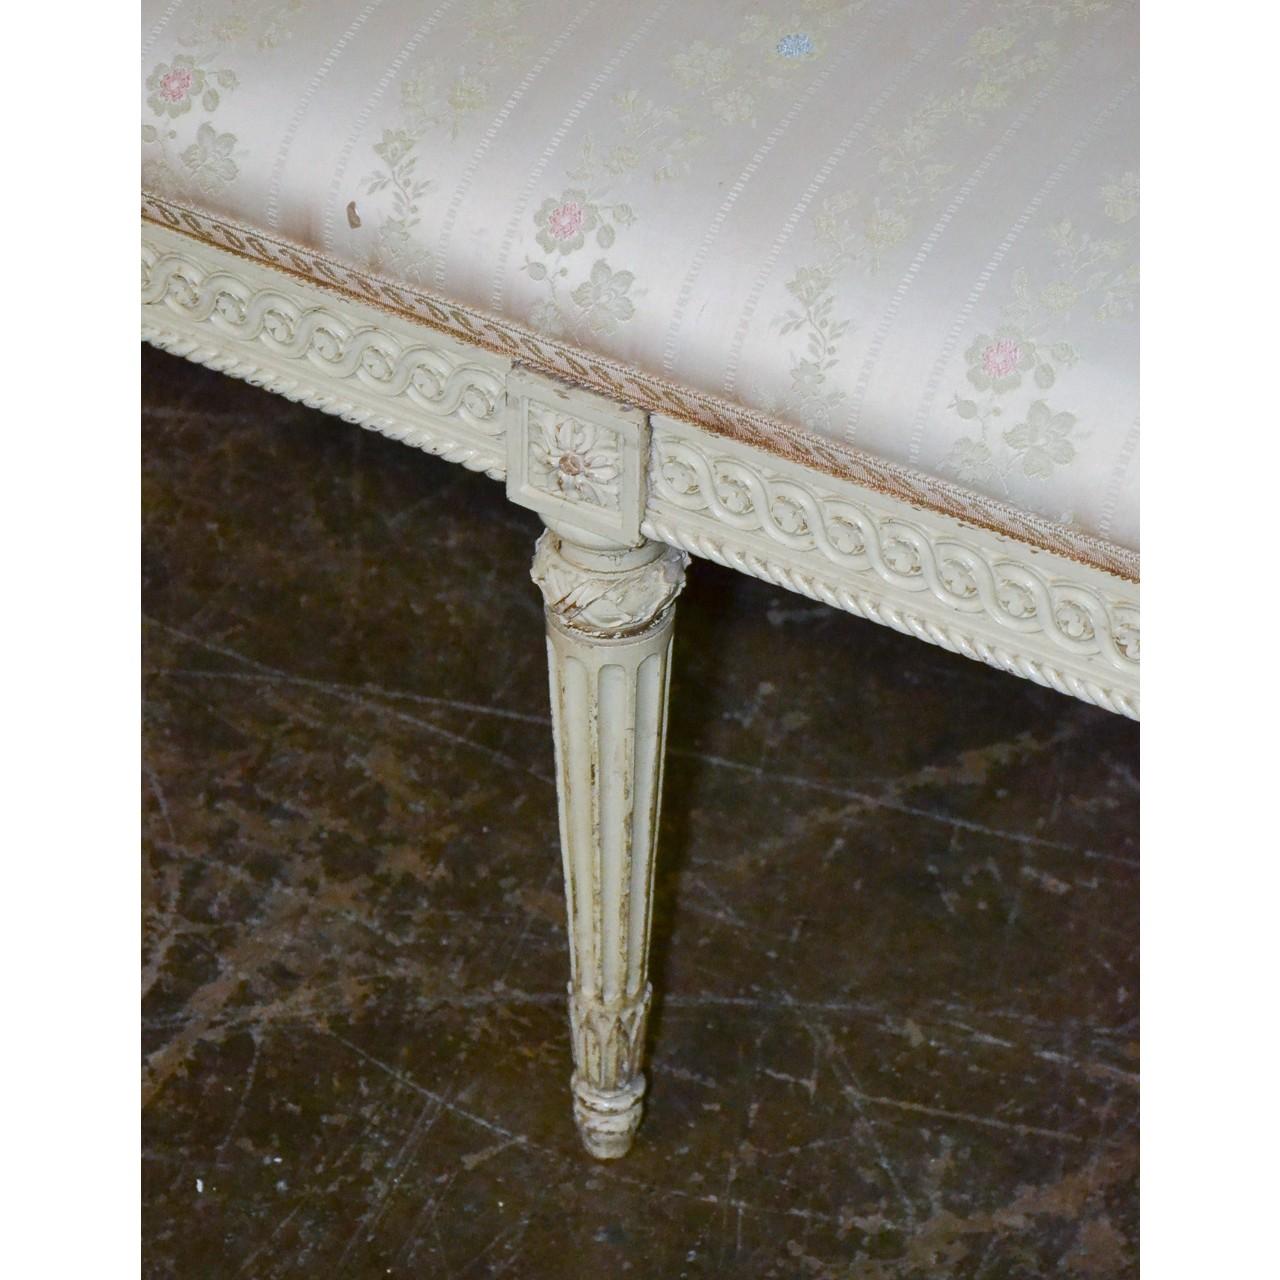 Gorgeous 19th century French Louis XVI style painted bench. Finely carved with stylized trim and flower heads. On sleek tapered and fluted legs. Damask upholstered top,

circa 1870.